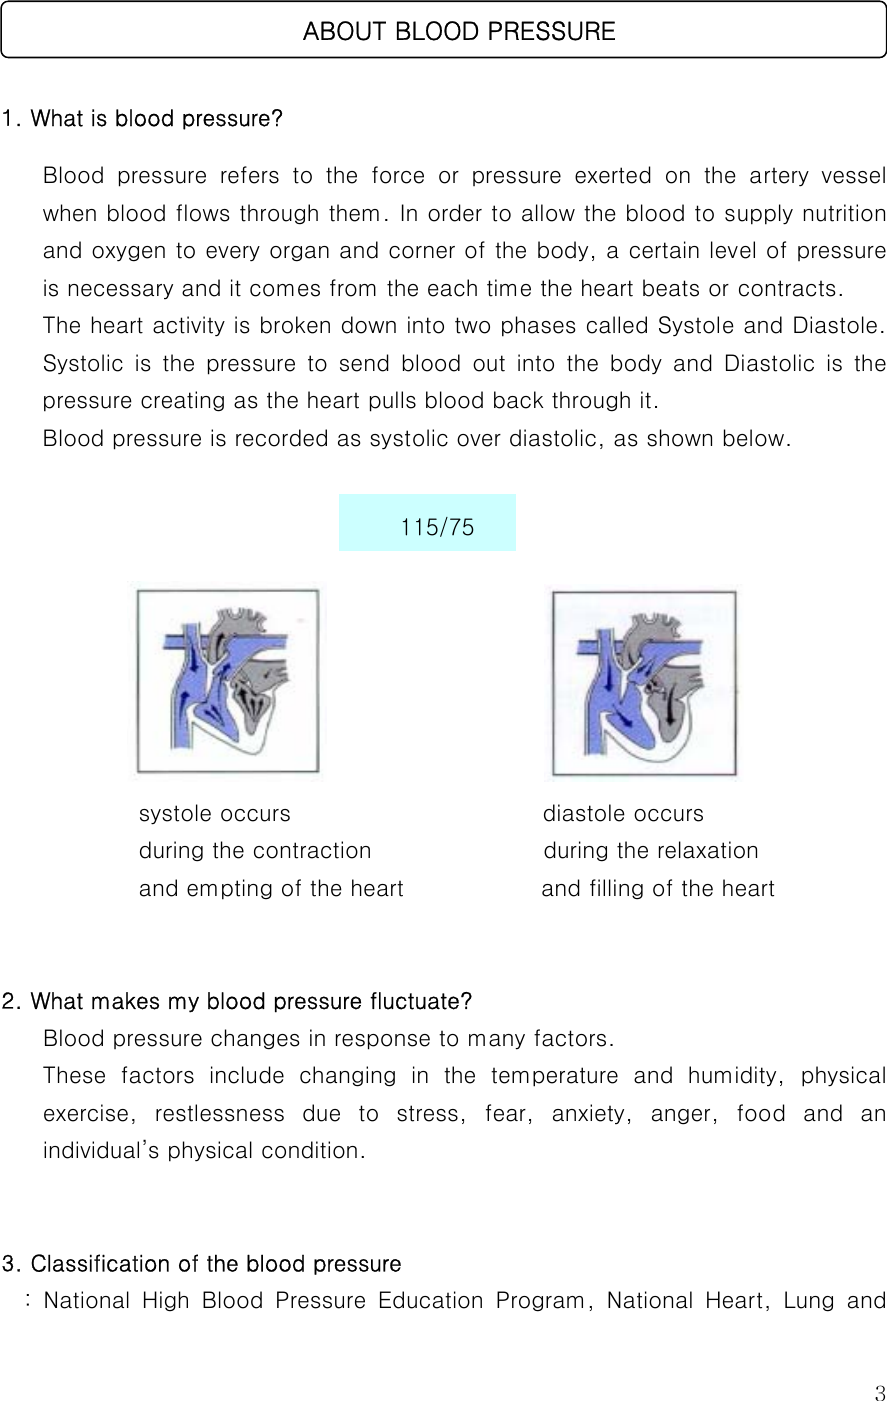  3    1. What is blood pressure? Blood  pressure  refers  to  the  force  or  pressure  exerted  on  the  artery  vessel when blood flows through them. In order to allow the blood to supply nutrition and oxygen to every organ and corner of the body, a certain level of pressure is necessary and it comes from the each time the heart beats or contracts. The heart activity is broken down into two phases called Systole and Diastole. Systolic  is  the  pressure  to  send  blood  out  into  the  body  and  Diastolic  is  the pressure creating as the heart pulls blood back through it. Blood pressure is recorded as systolic over diastolic, as shown below.                                                              systole occurs                      diastole occurs  during the contraction                              during the relaxation   and empting of the heart            and filling of the heart   2. What makes my blood pressure fluctuate? Blood pressure changes in response to many factors. These  factors  include  changing  in  the  temperature  and  humidity, physical exercise,  restlessness  due  to  stress,  fear,  anxiety,  anger,  food  and  an individual’s physical condition.   3. Classification of the blood pressure   :  National  High  Blood  Pressure  Education  Program,  National  Heart,  Lung  and    ABOUT BLOOD PRESSURE 115/75 